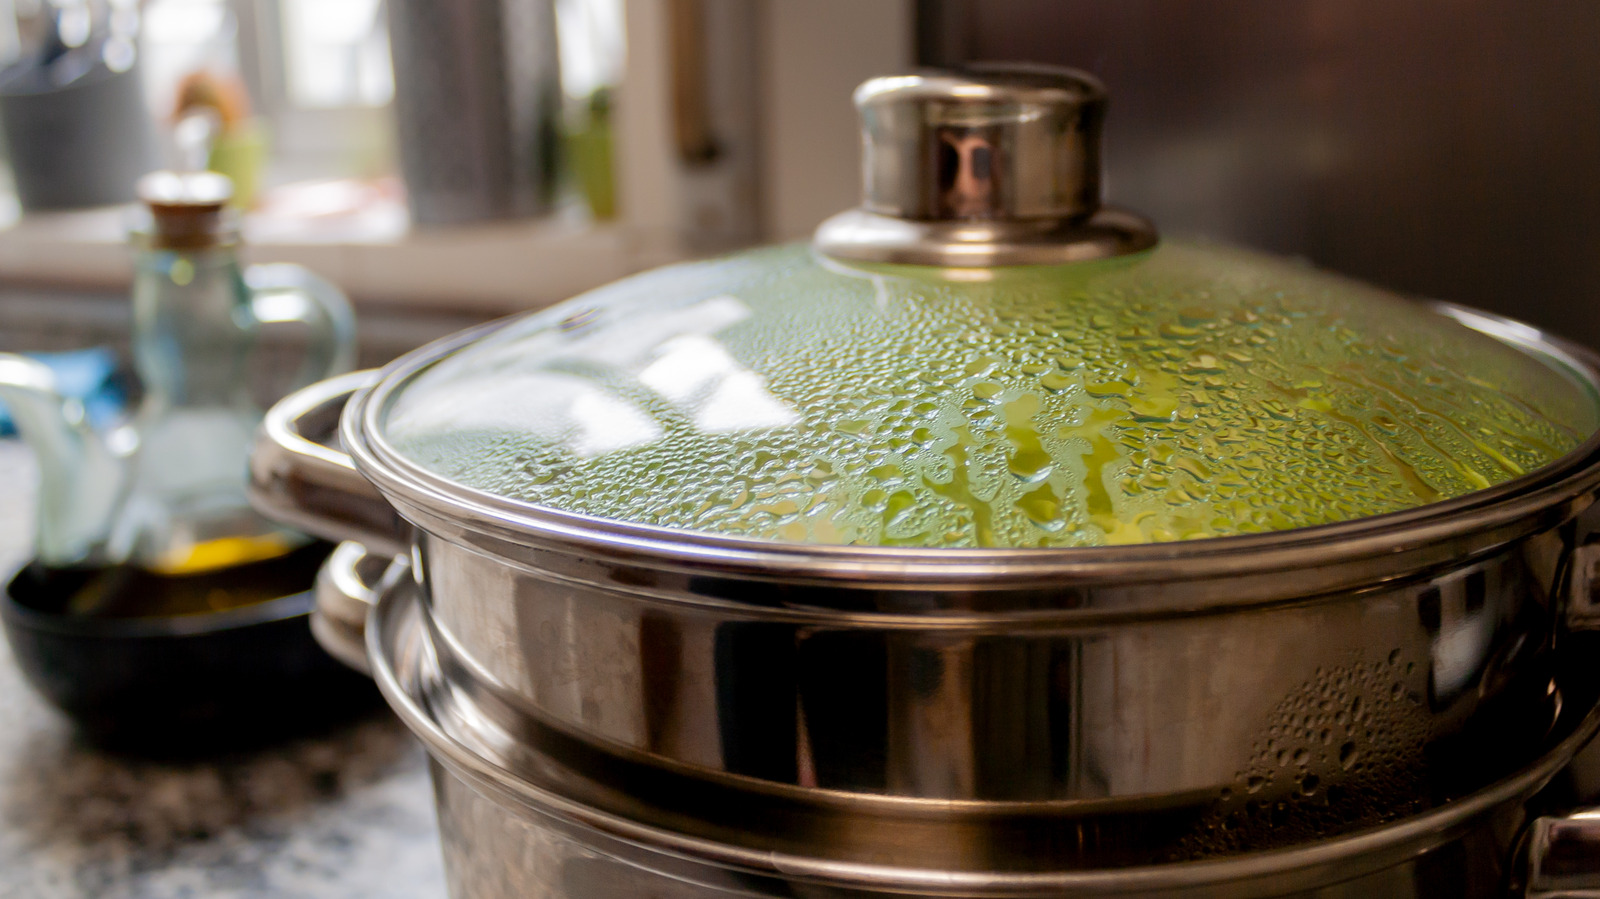 https://www.thedailymeal.com/img/gallery/do-you-need-a-steamer-pot-to-properly-steam-food/l-intro-1674537167.jpg